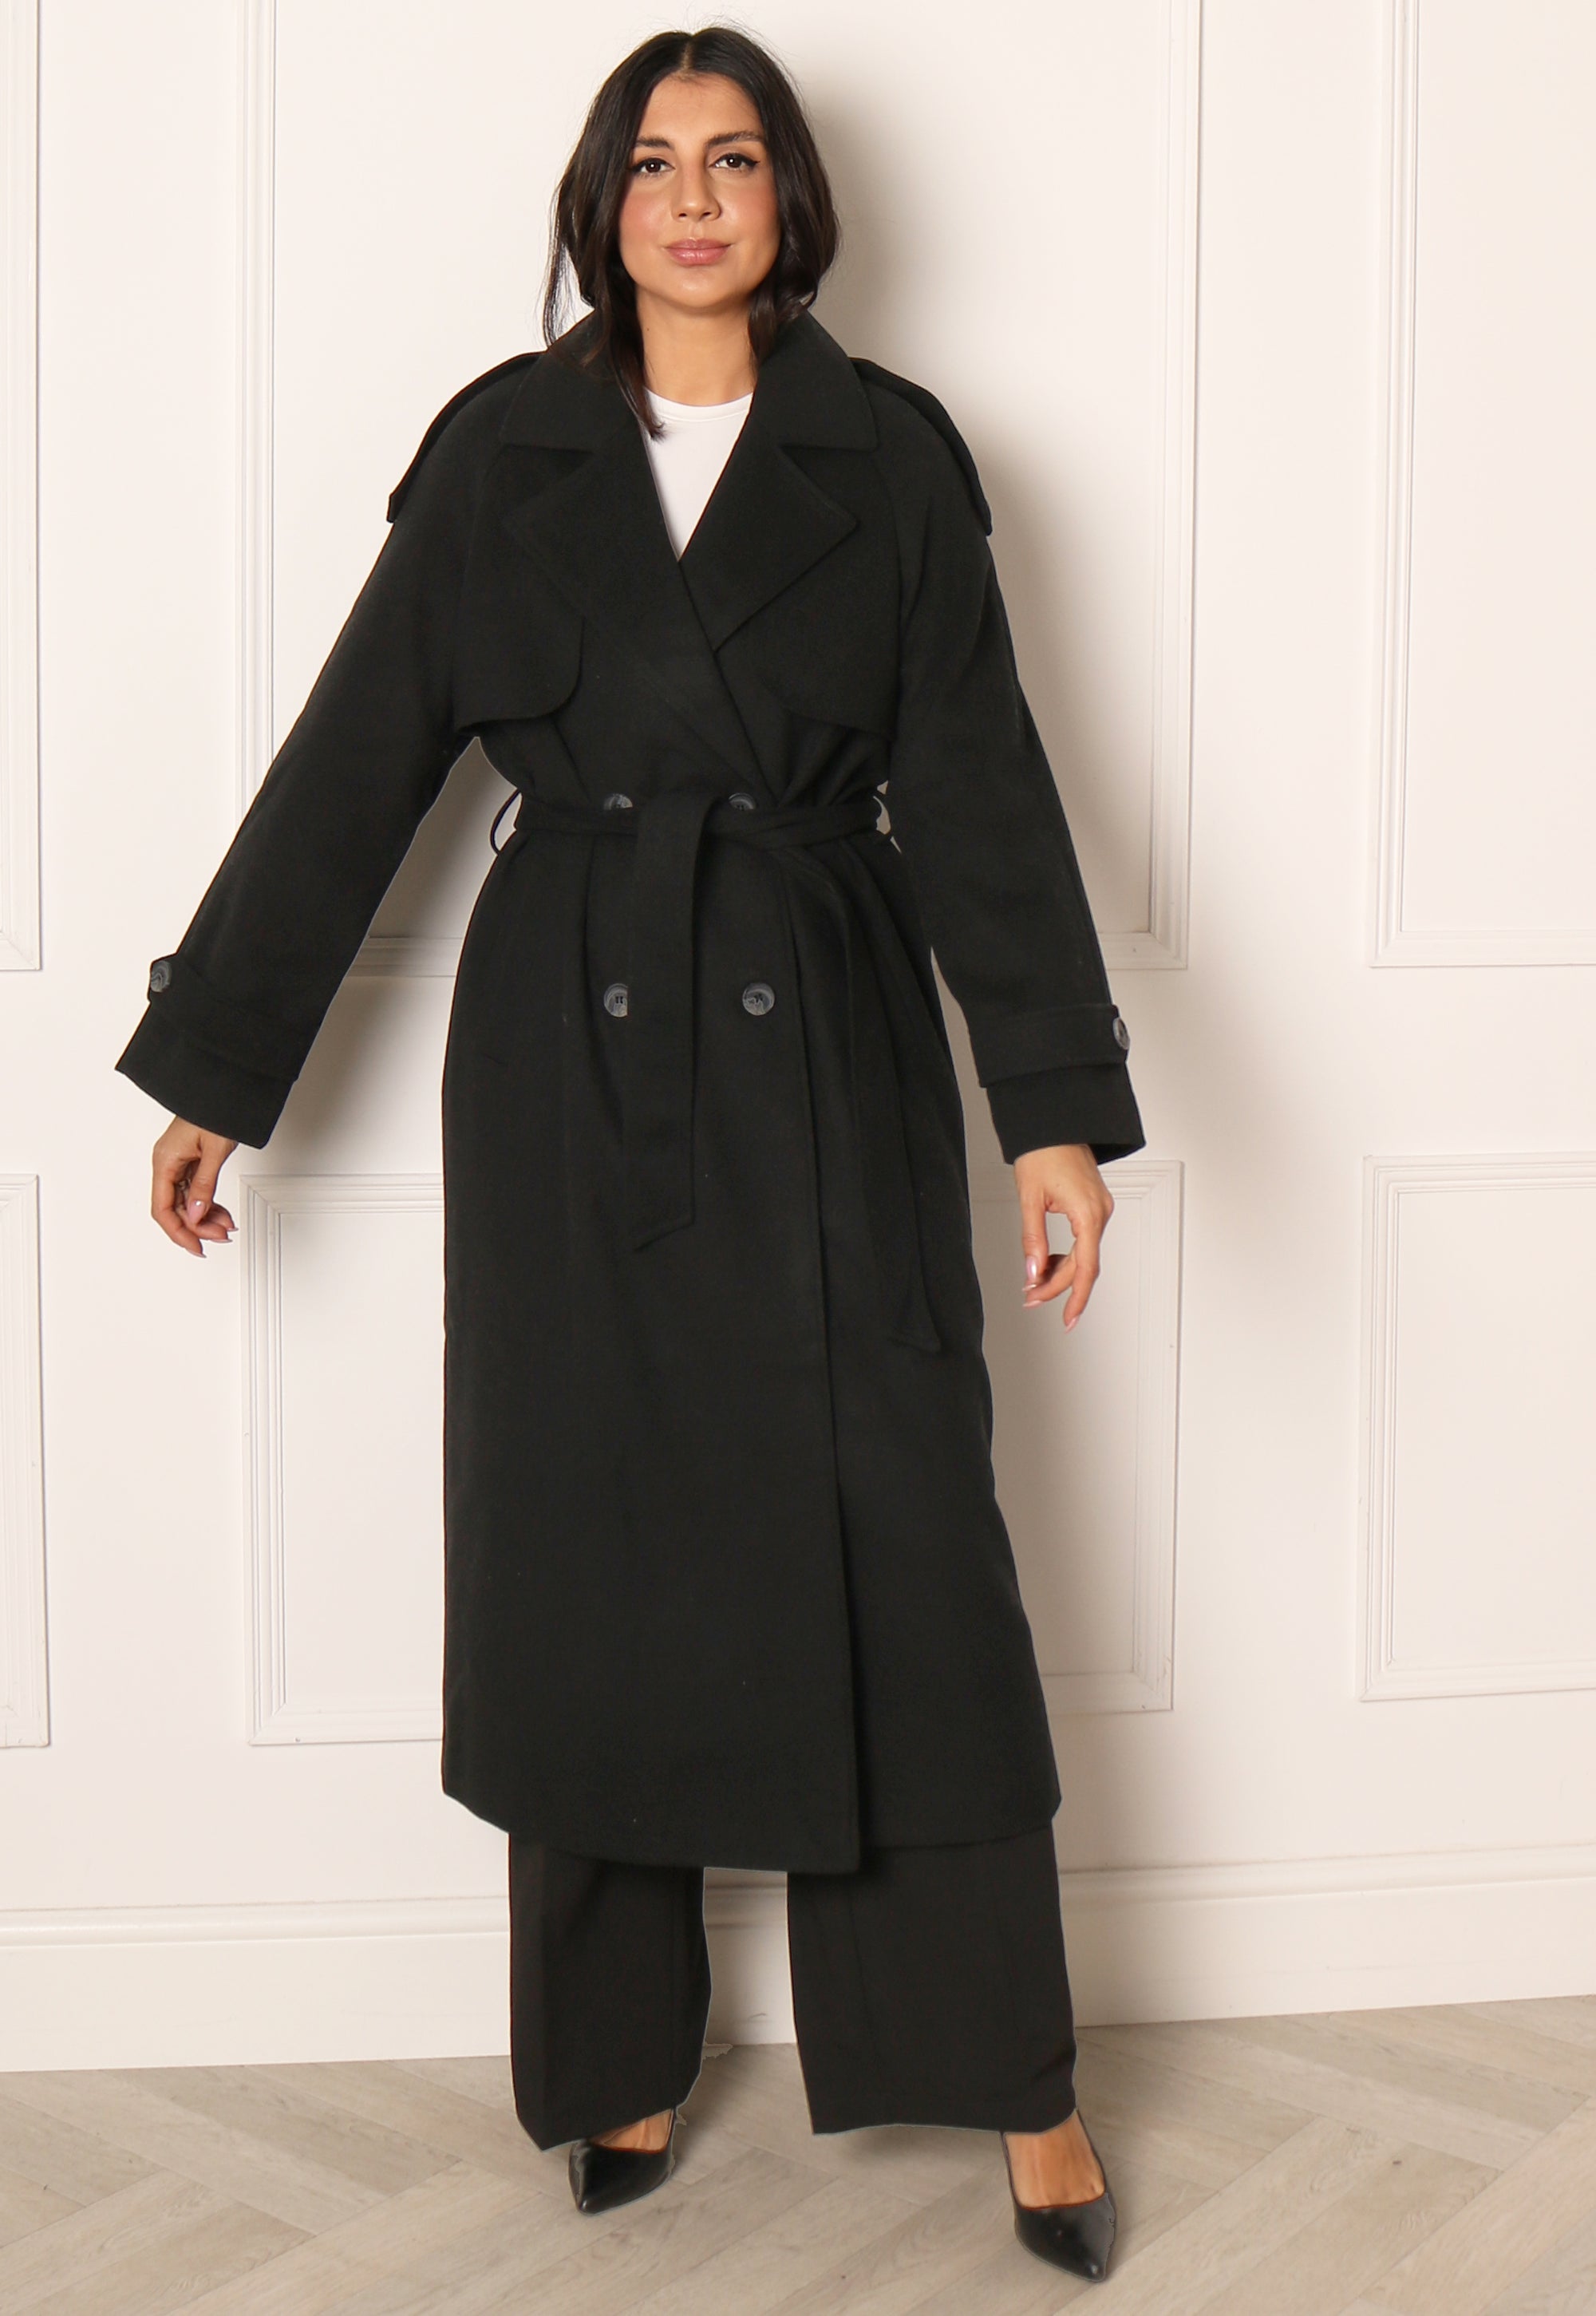 ONLY Maisy Premium Double Breasted Longline Belted Wool Trench Coat in Black - One Nation Clothing